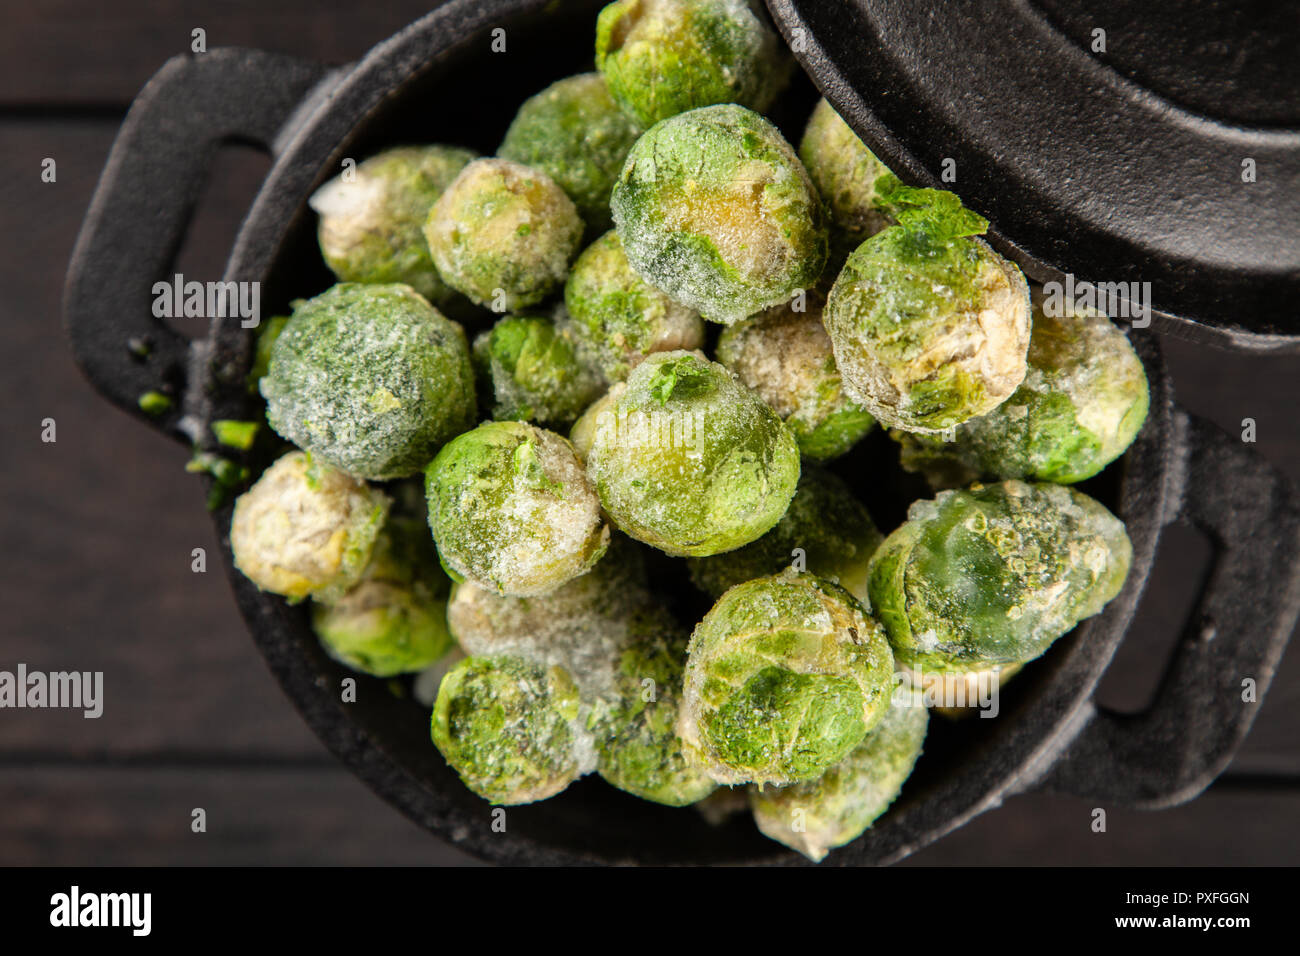 Frozen brussles sprouts on dark background Stock Photo